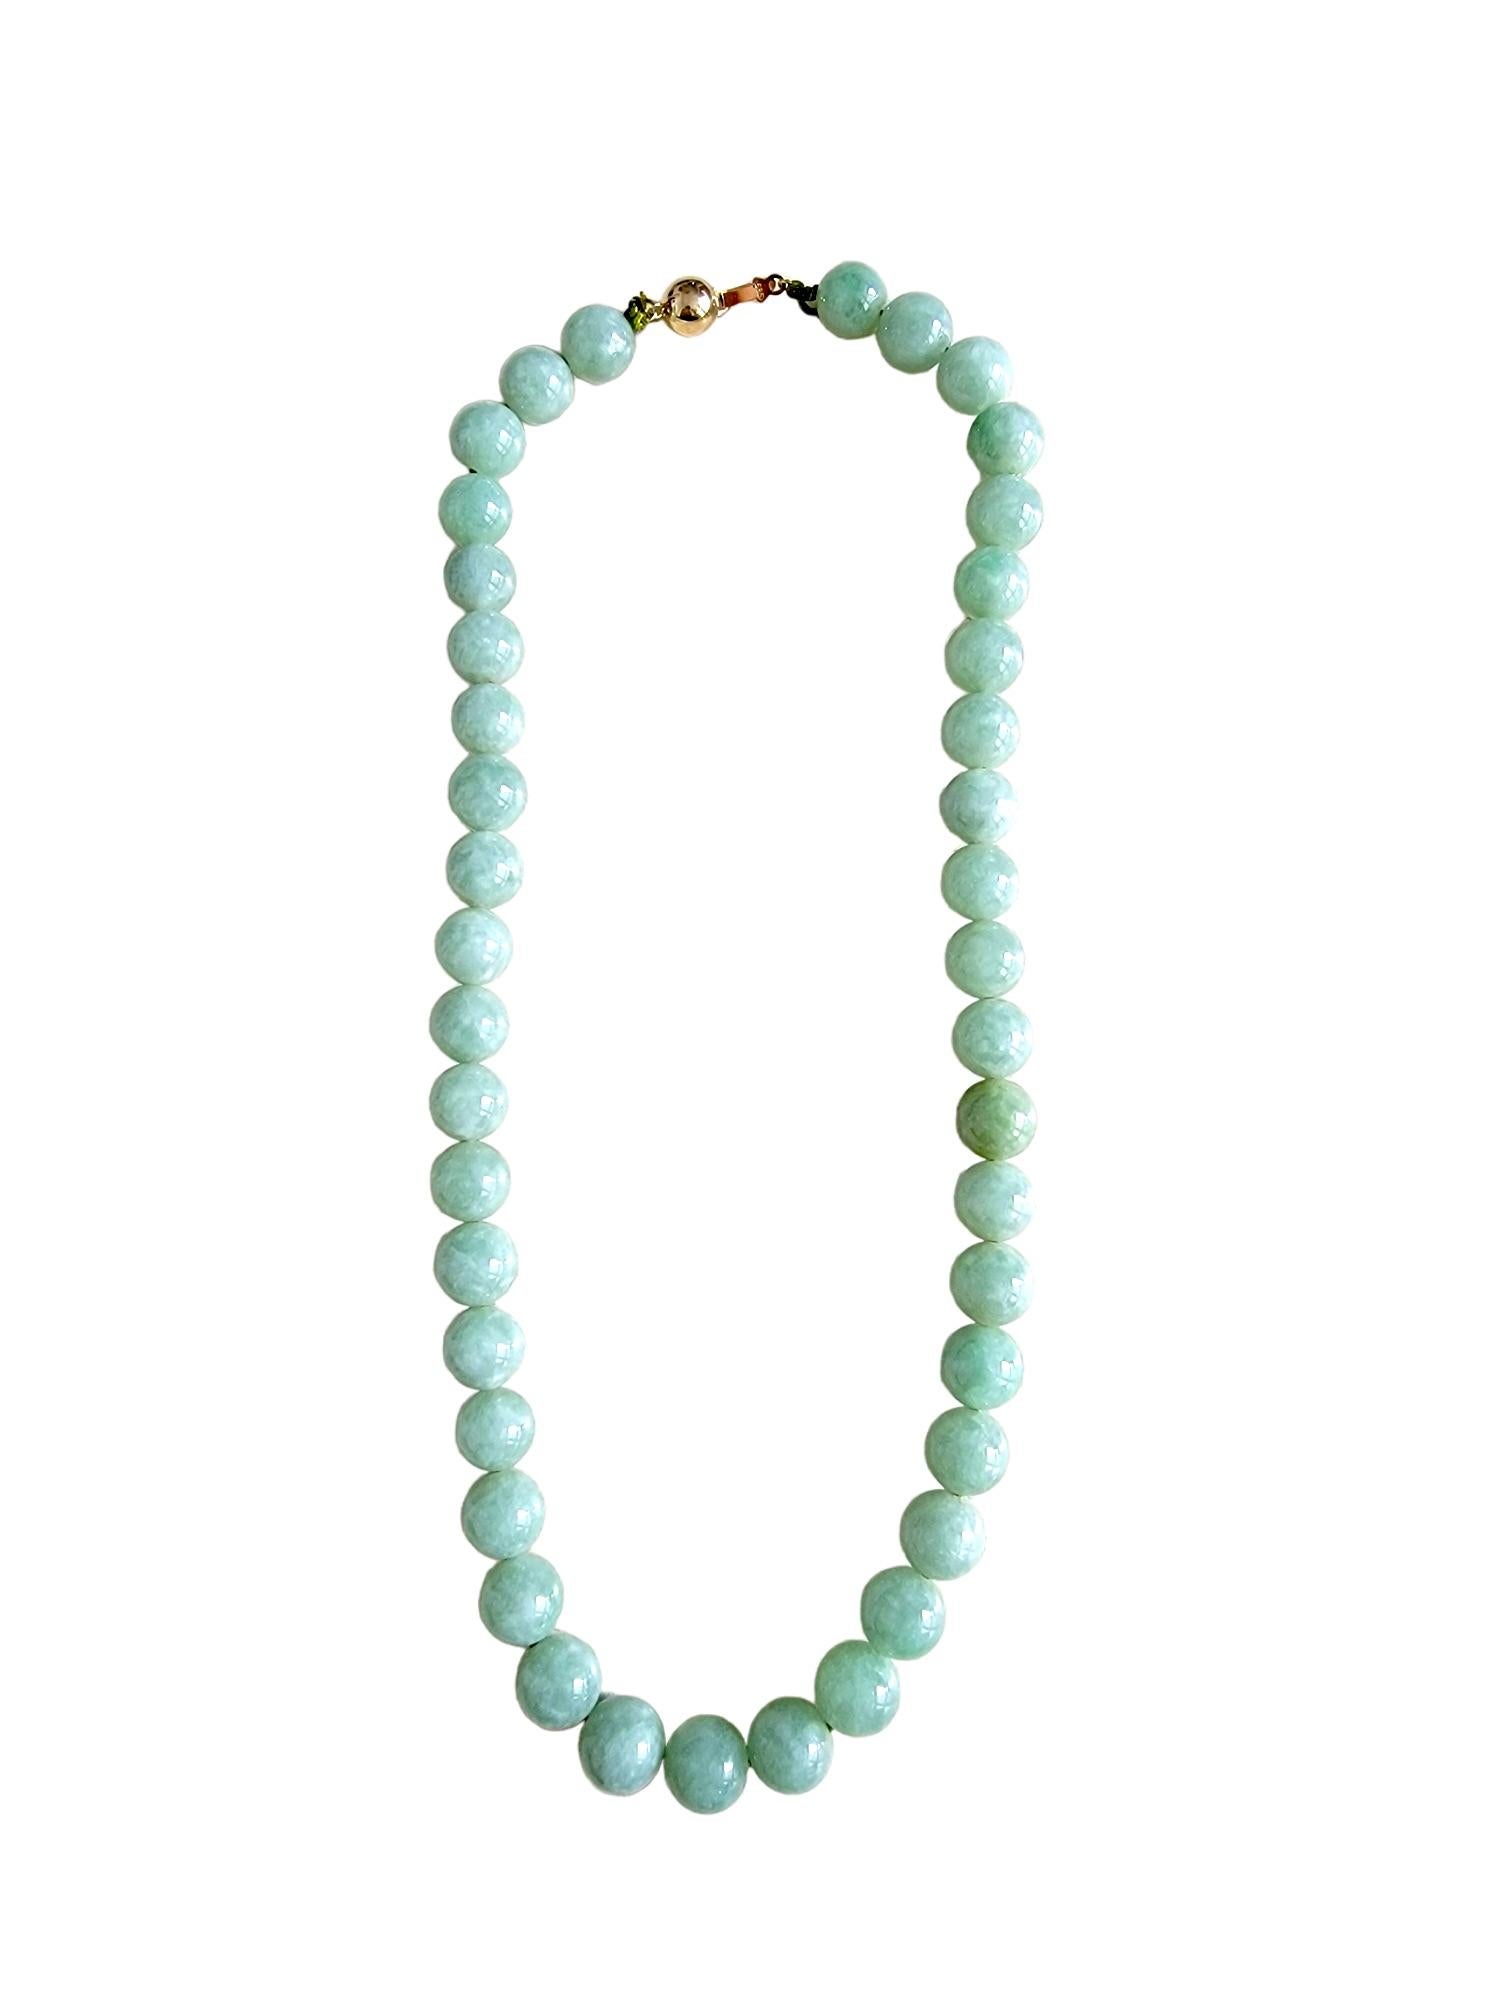 Ball Cut Imperial Green Burmese A-Jade Beaded Necklace (10mm Each x 42 beads) 10001 For Sale